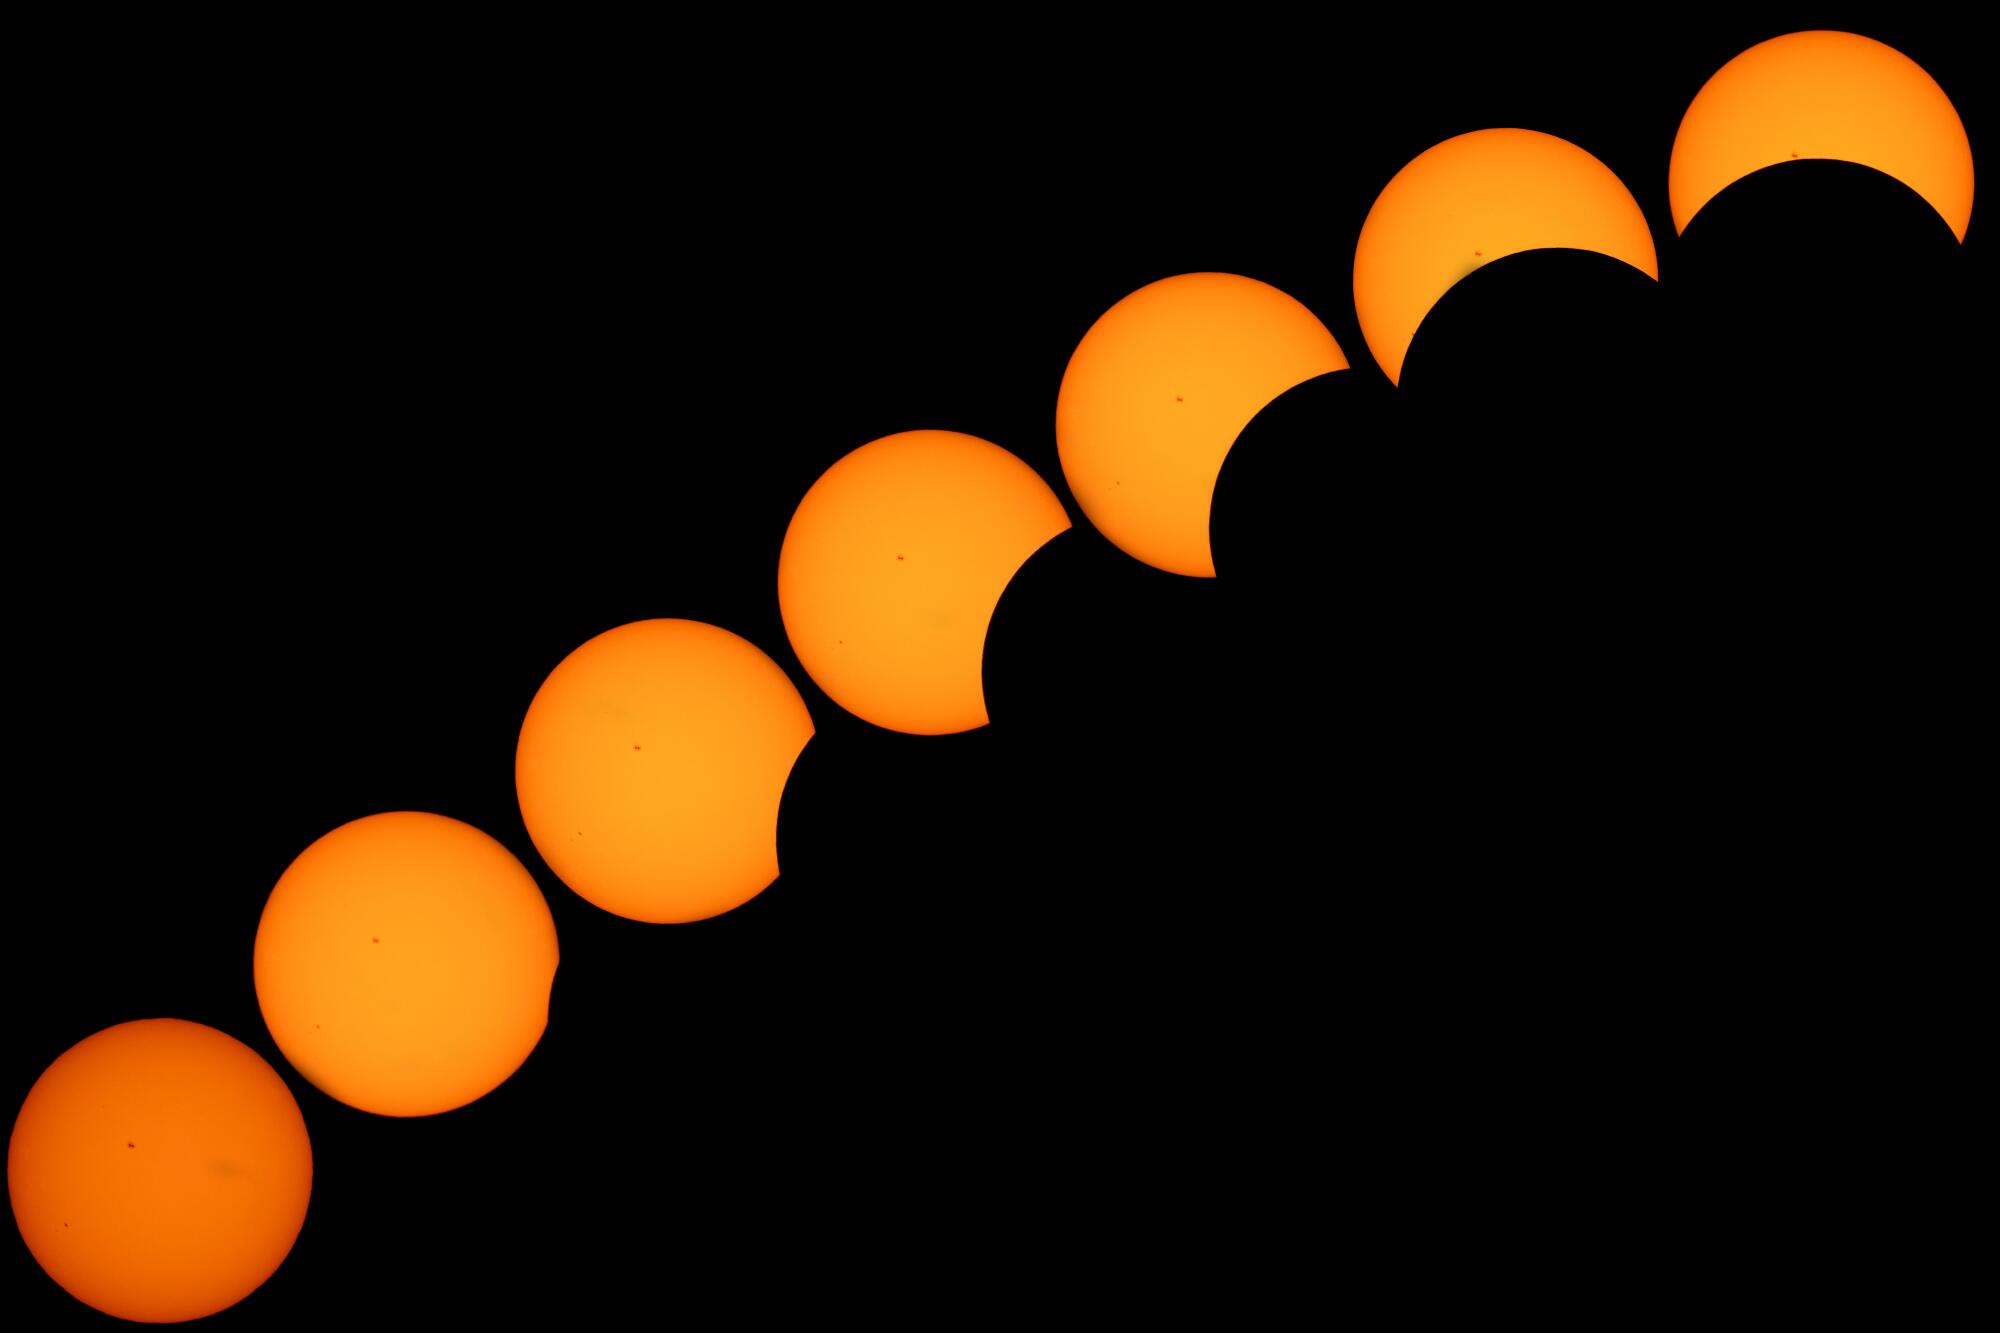 A photo composite of the sun as part of it increasingly becomes blocked by the moon against a black background.